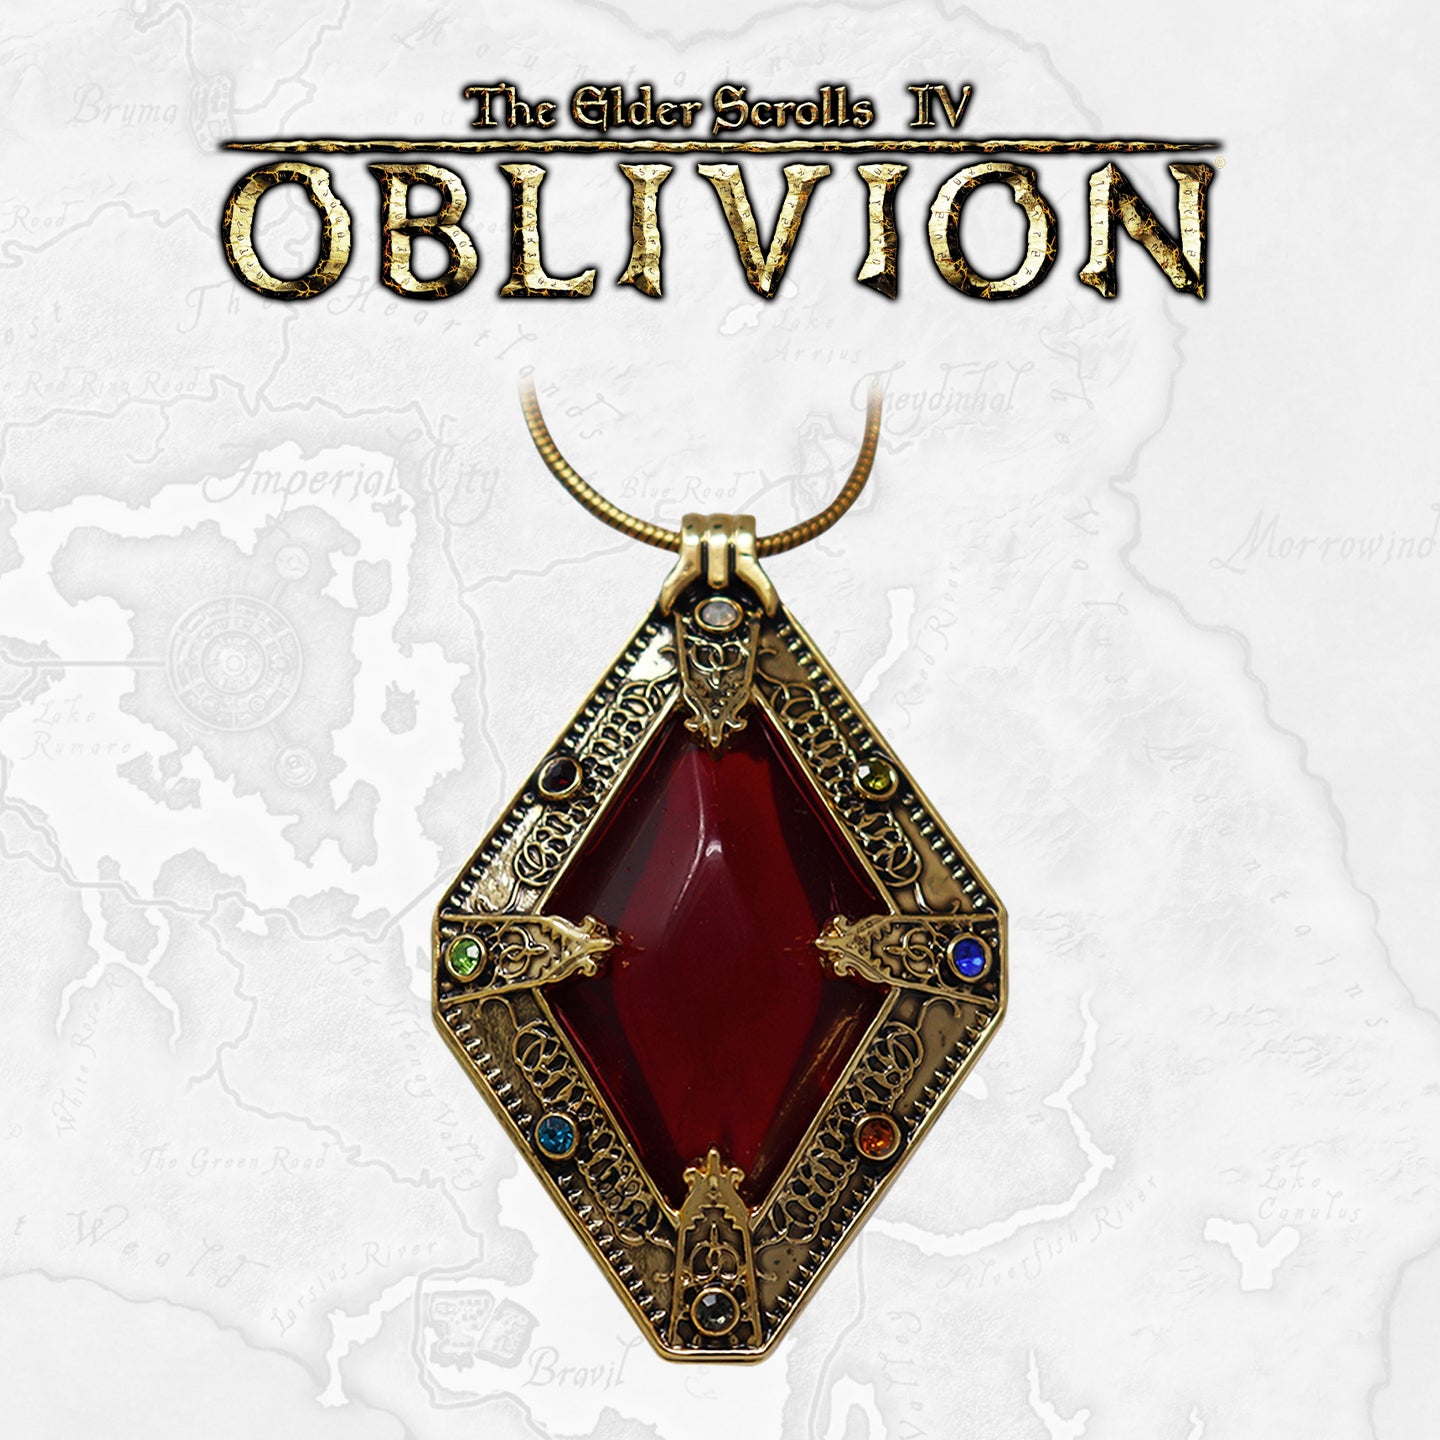 The Elder Scrolls IV: Oblivion Limited Edition Replica Amulet of Kings Necklace